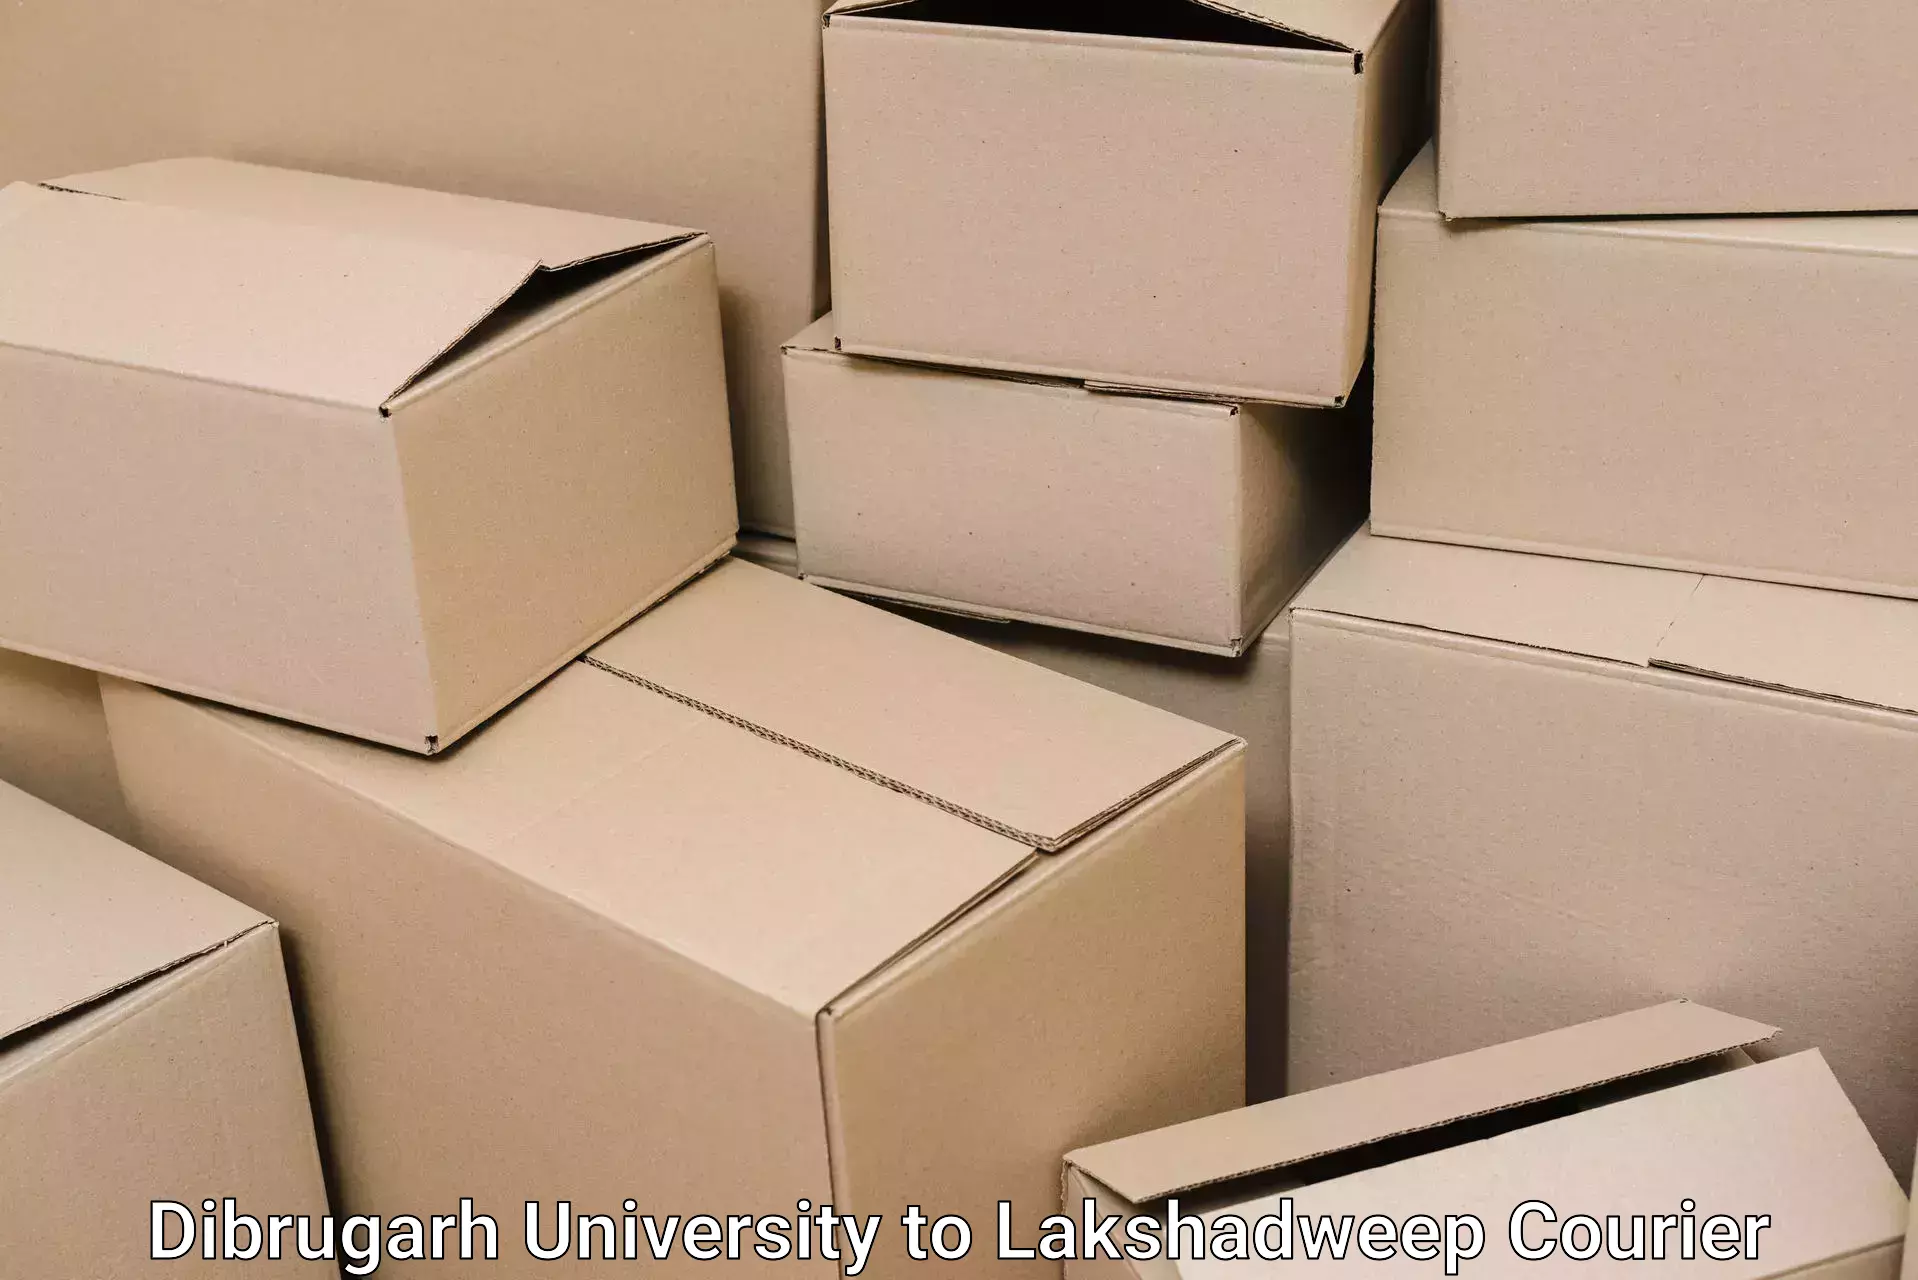 Residential relocation services Dibrugarh University to Lakshadweep